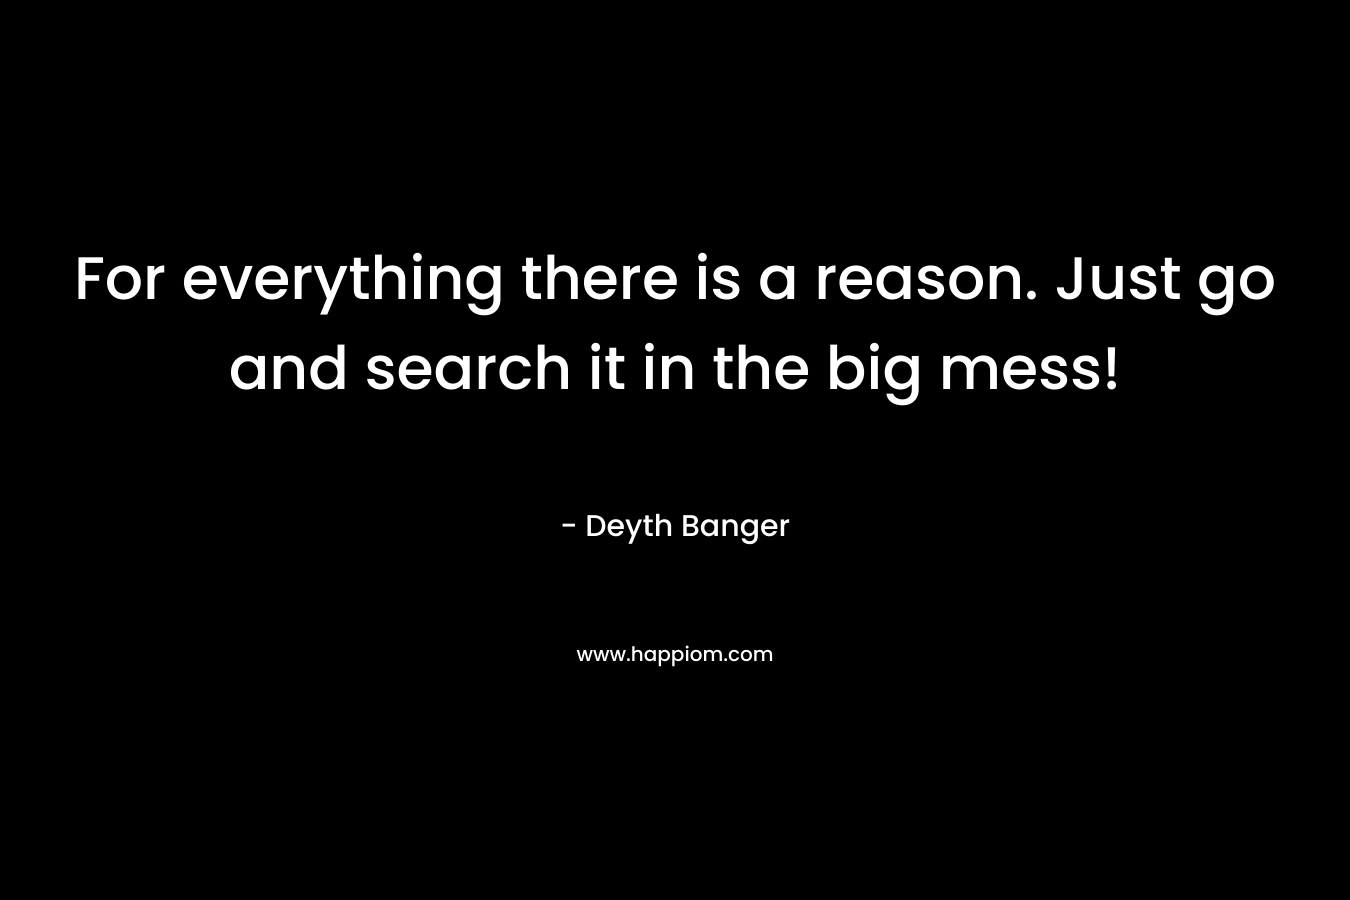 For everything there is a reason. Just go and search it in the big mess! – Deyth Banger